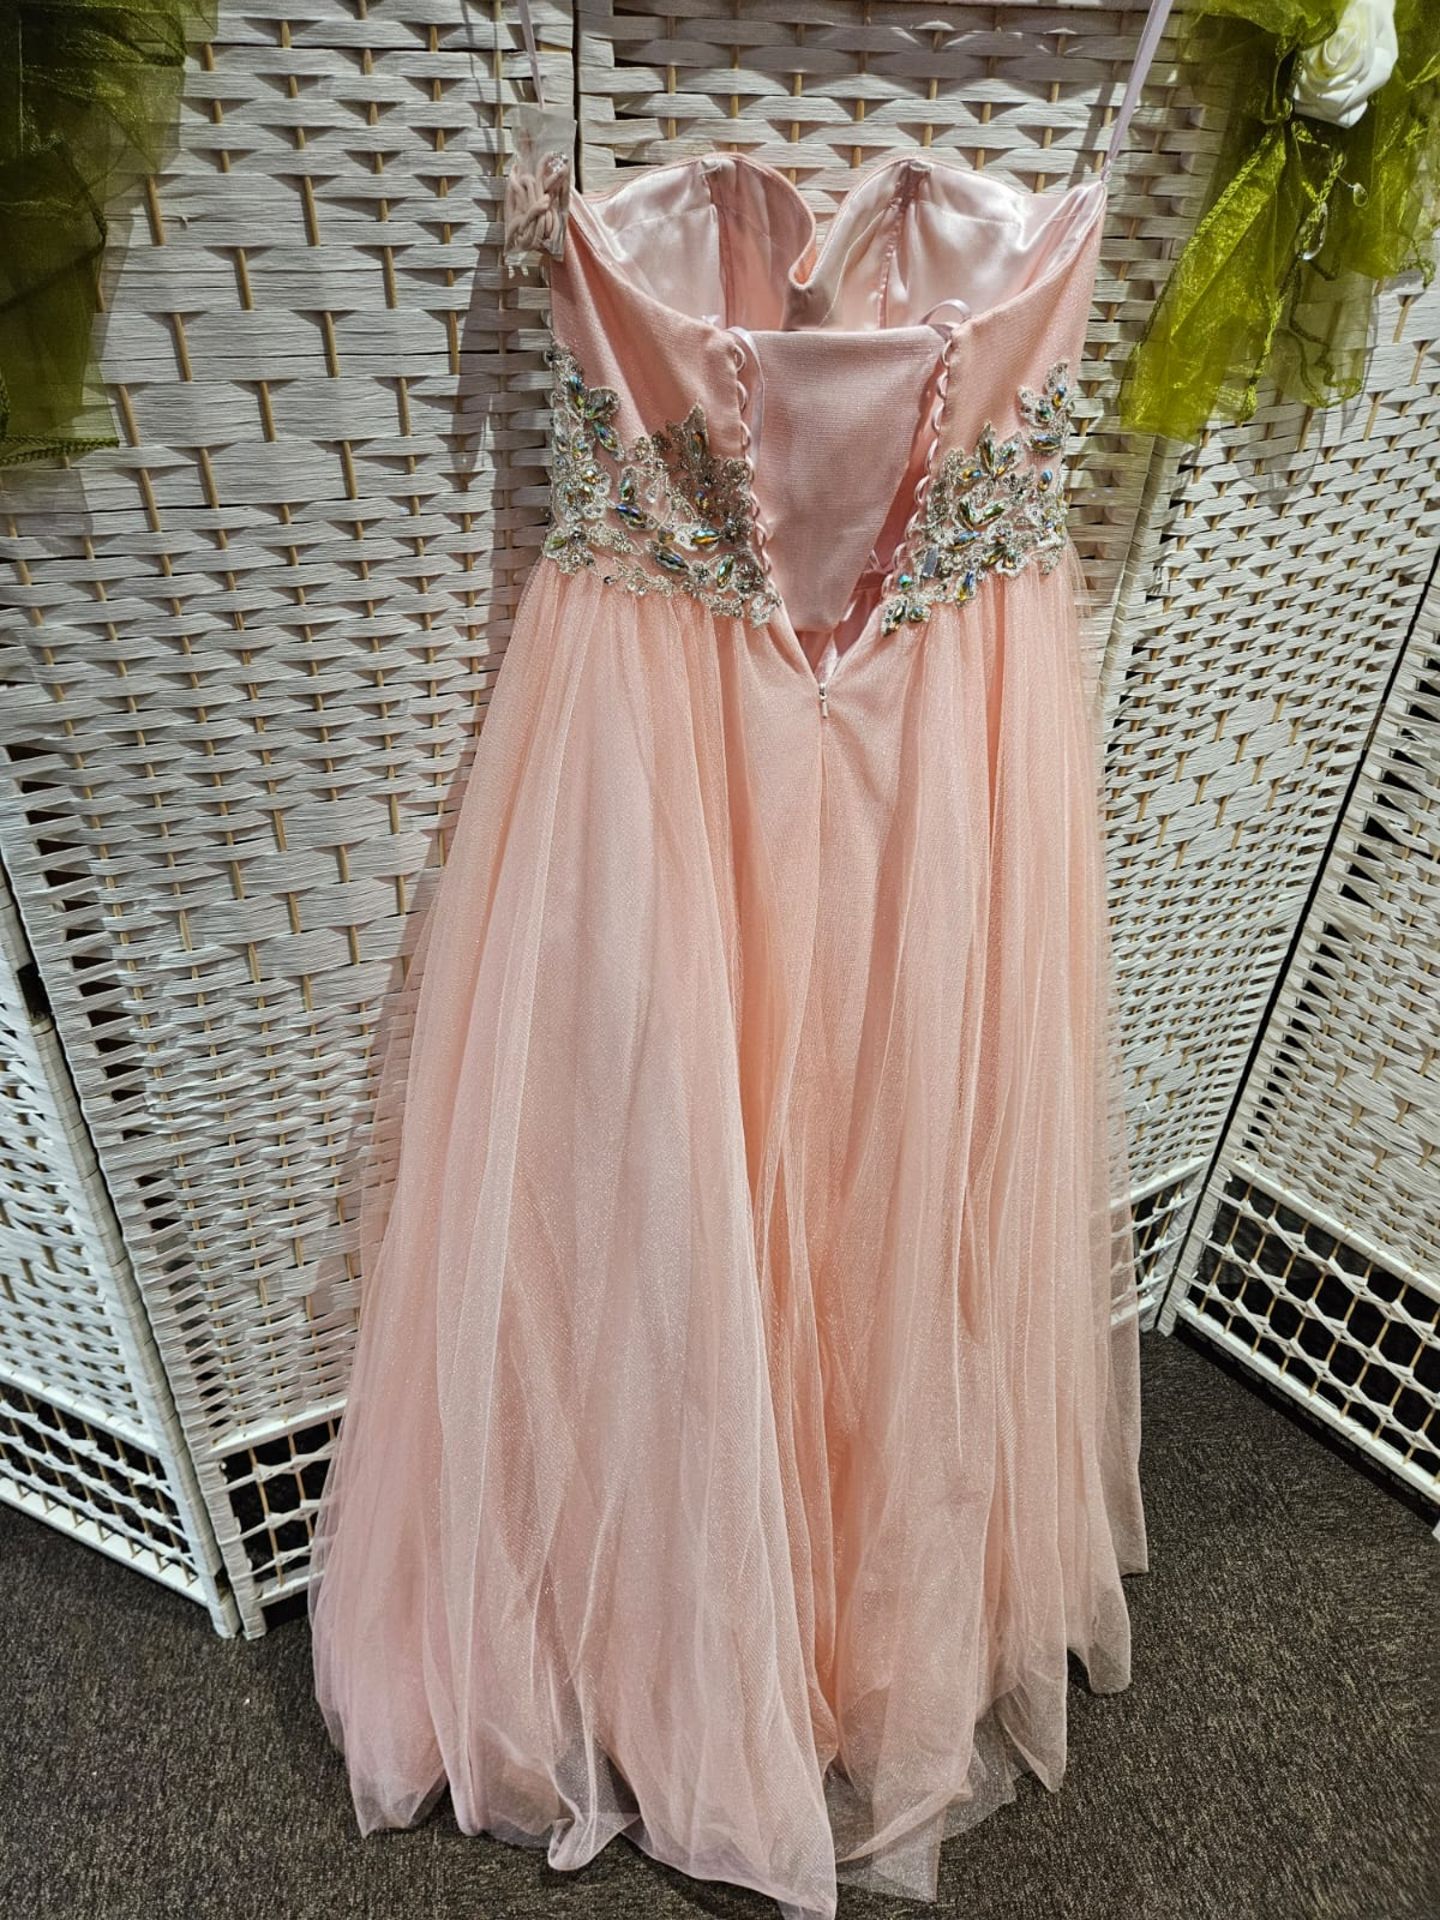 Prom Dress Crystal Breeze Peach Size 6 - Image 4 of 5